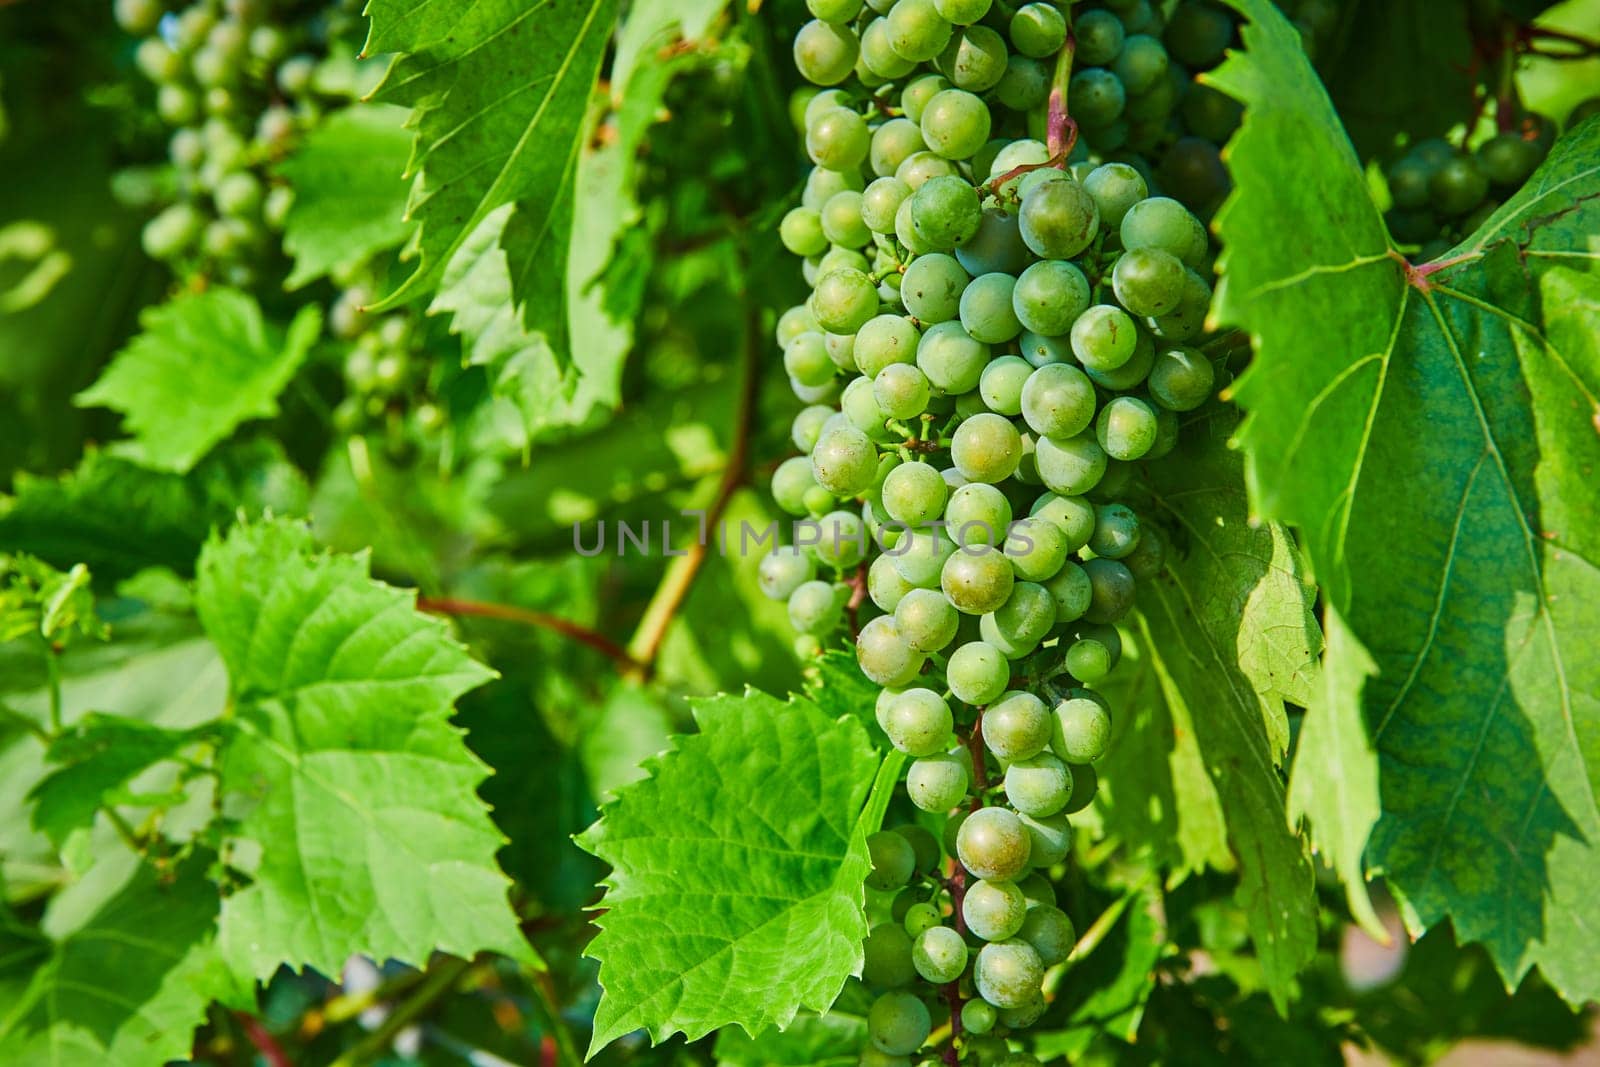 Image of Close up of green grapes growing in bundles between large leaves